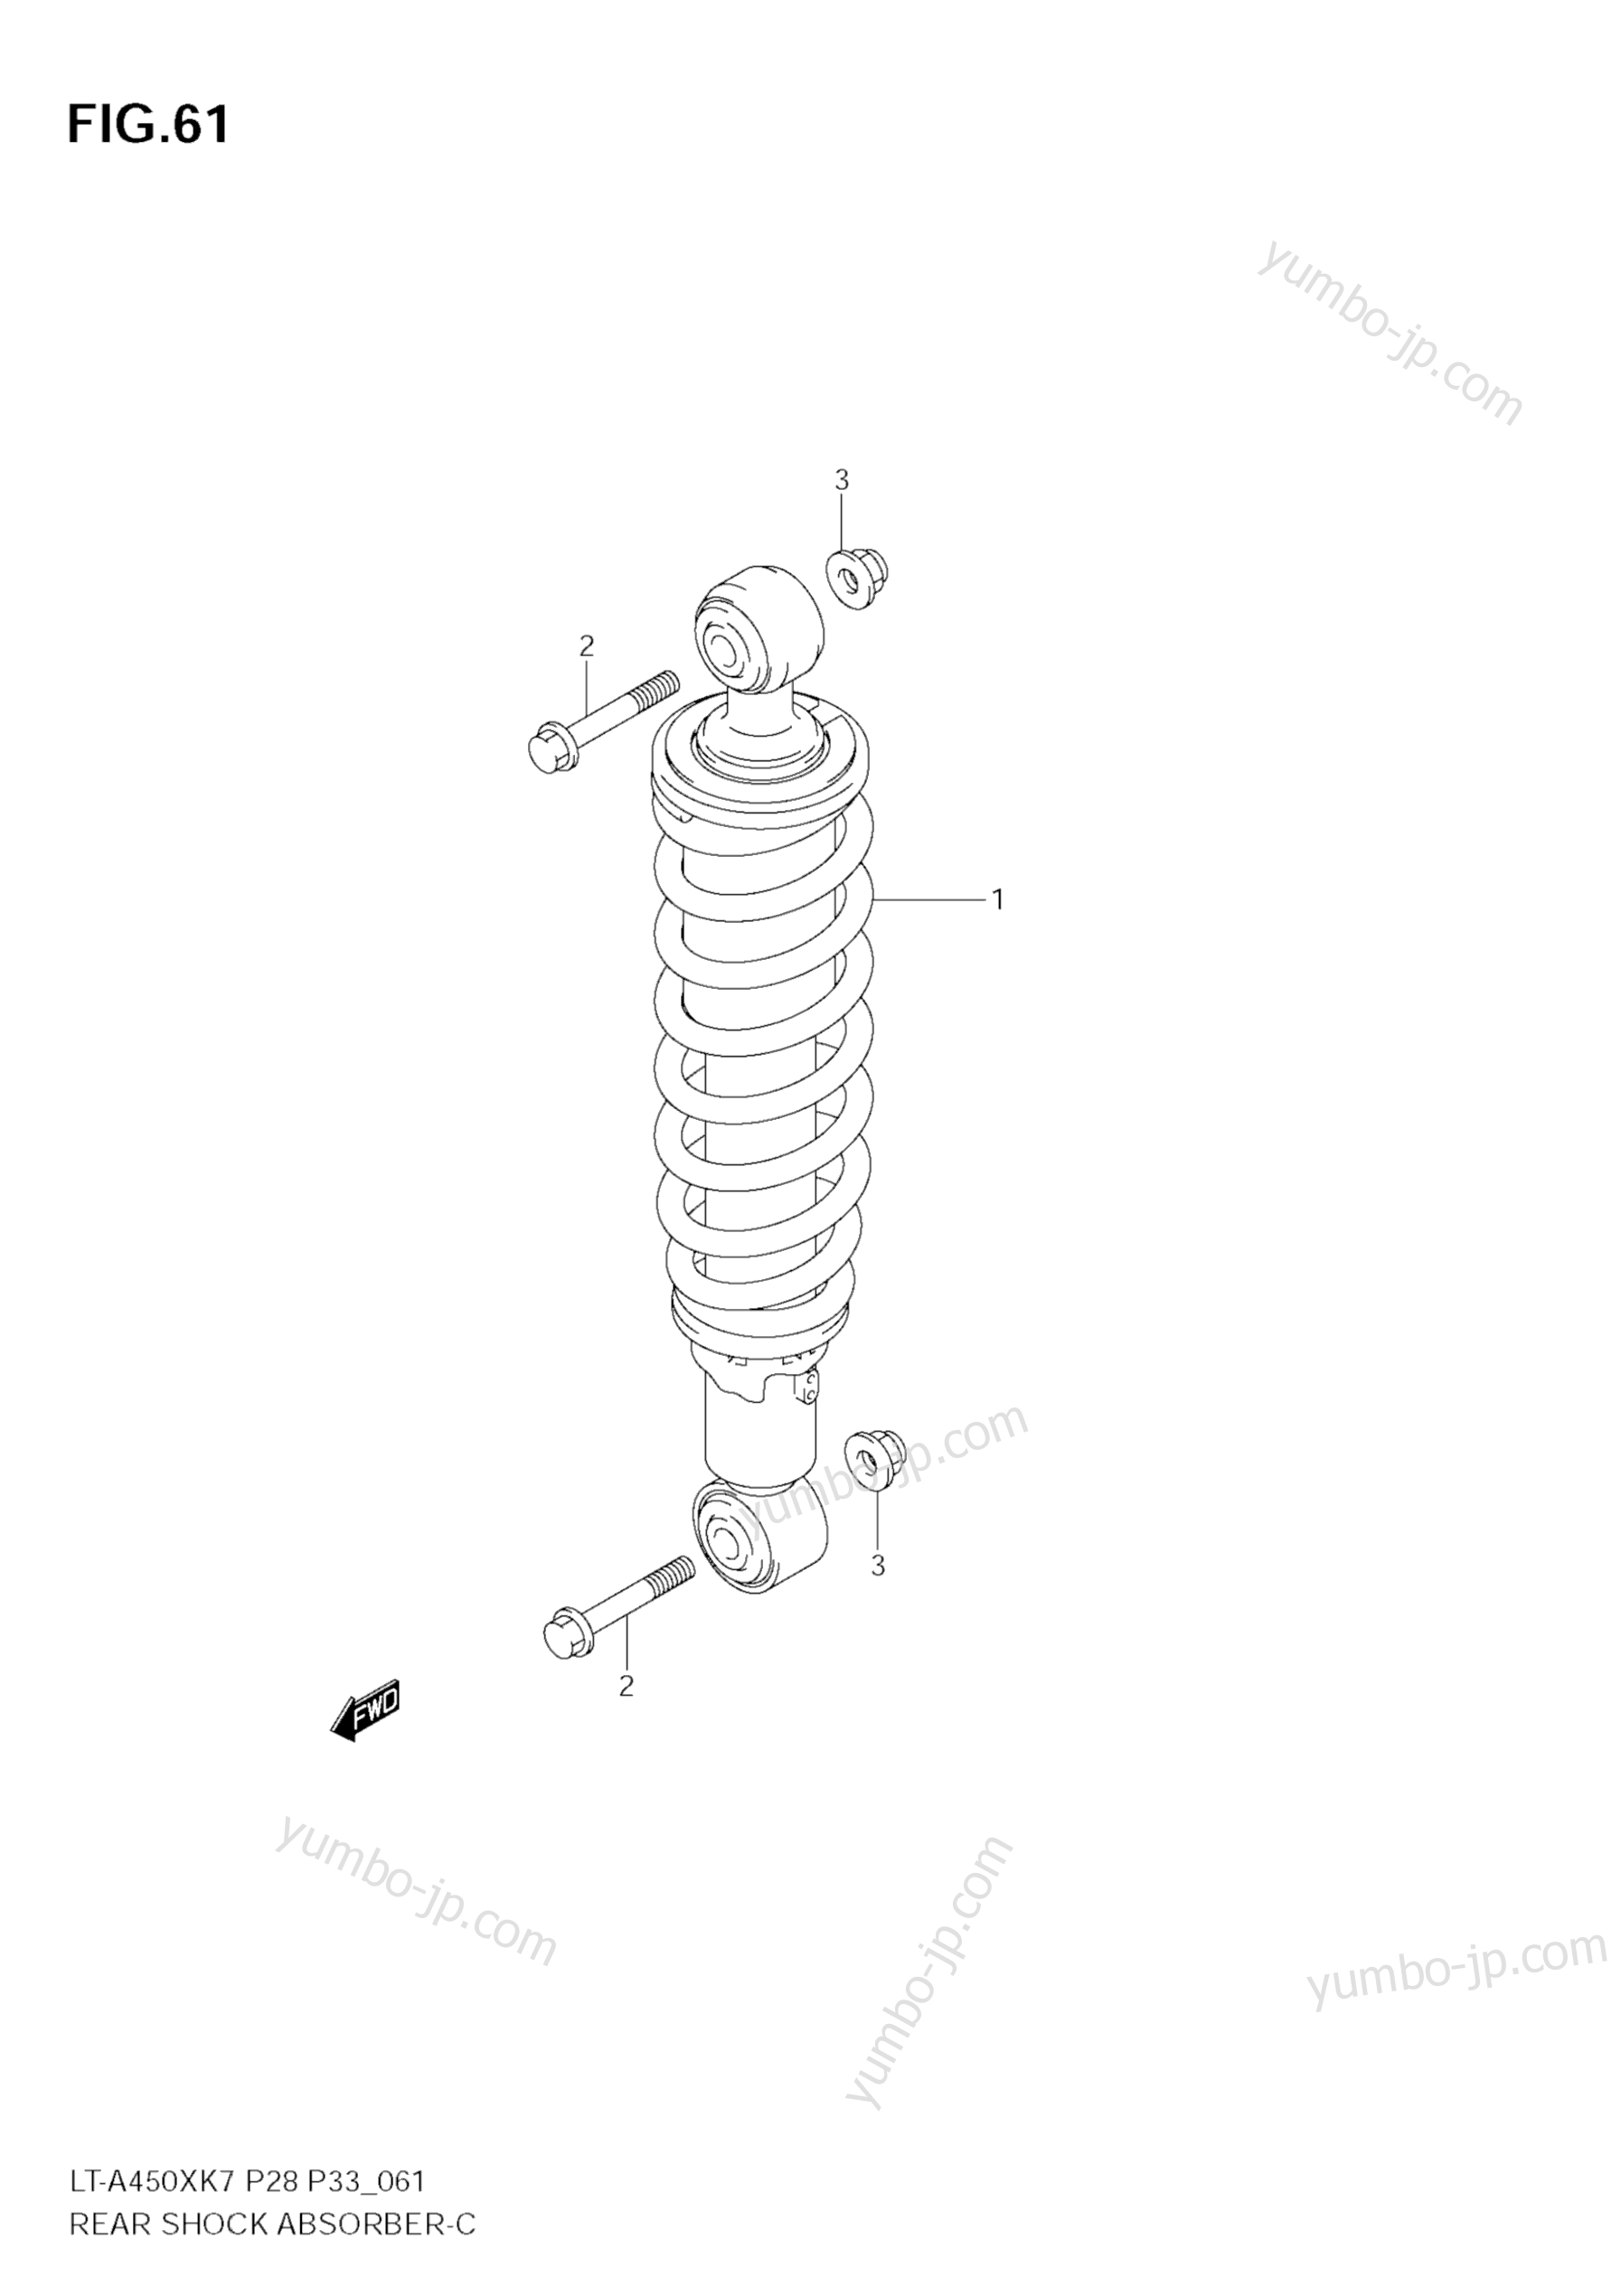 REAR SHOCK ABSORBER for ATVs SUZUKI KingQuad (LT-A450XZ) 2008 year